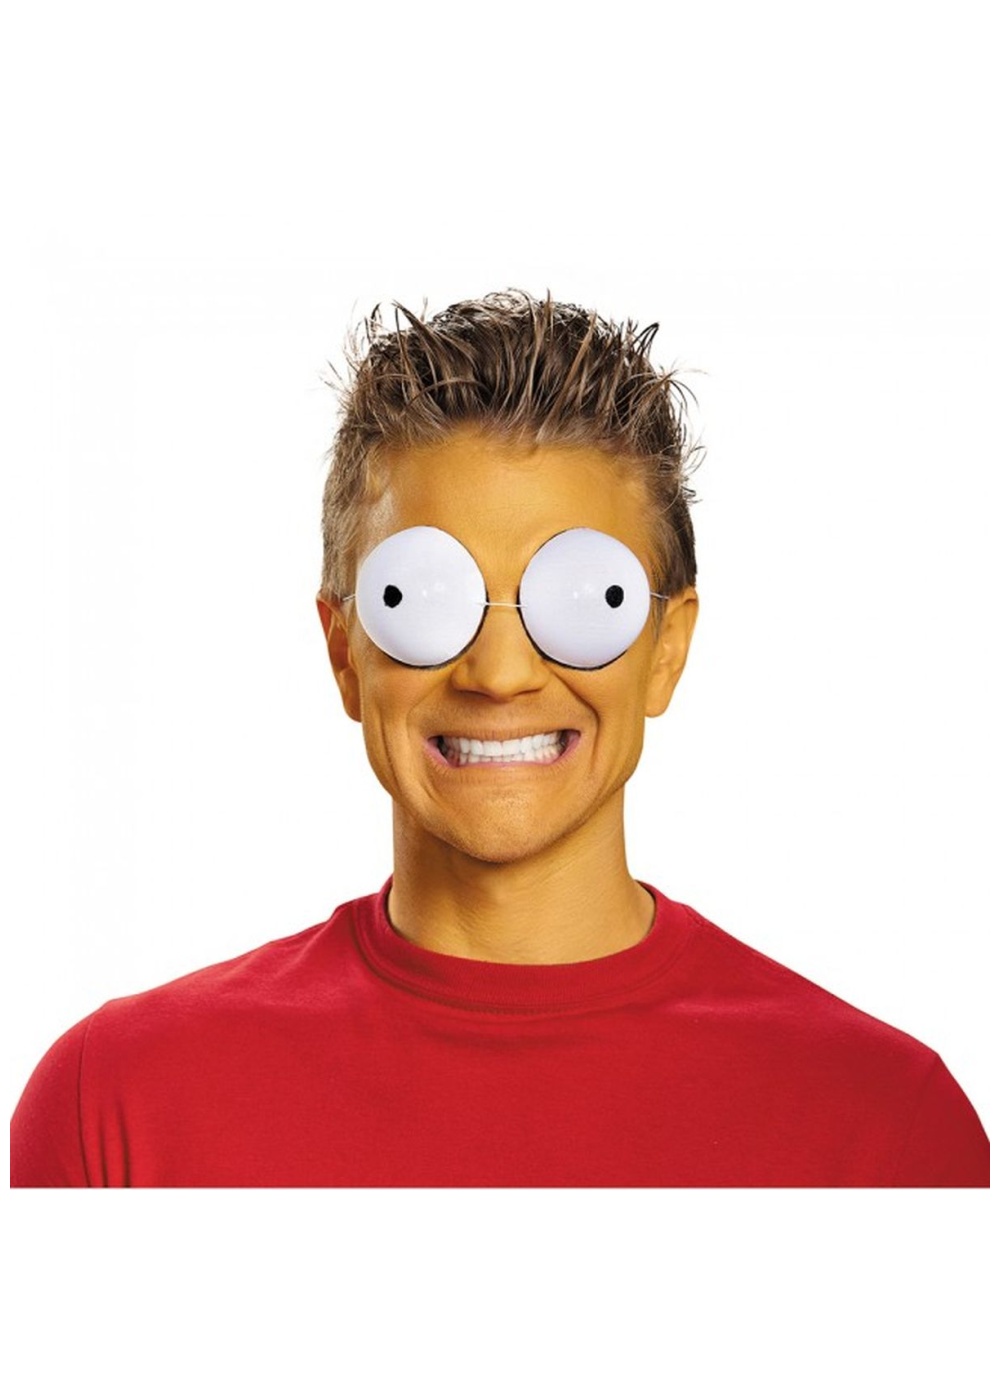  Simpsons Family Eye Goggles